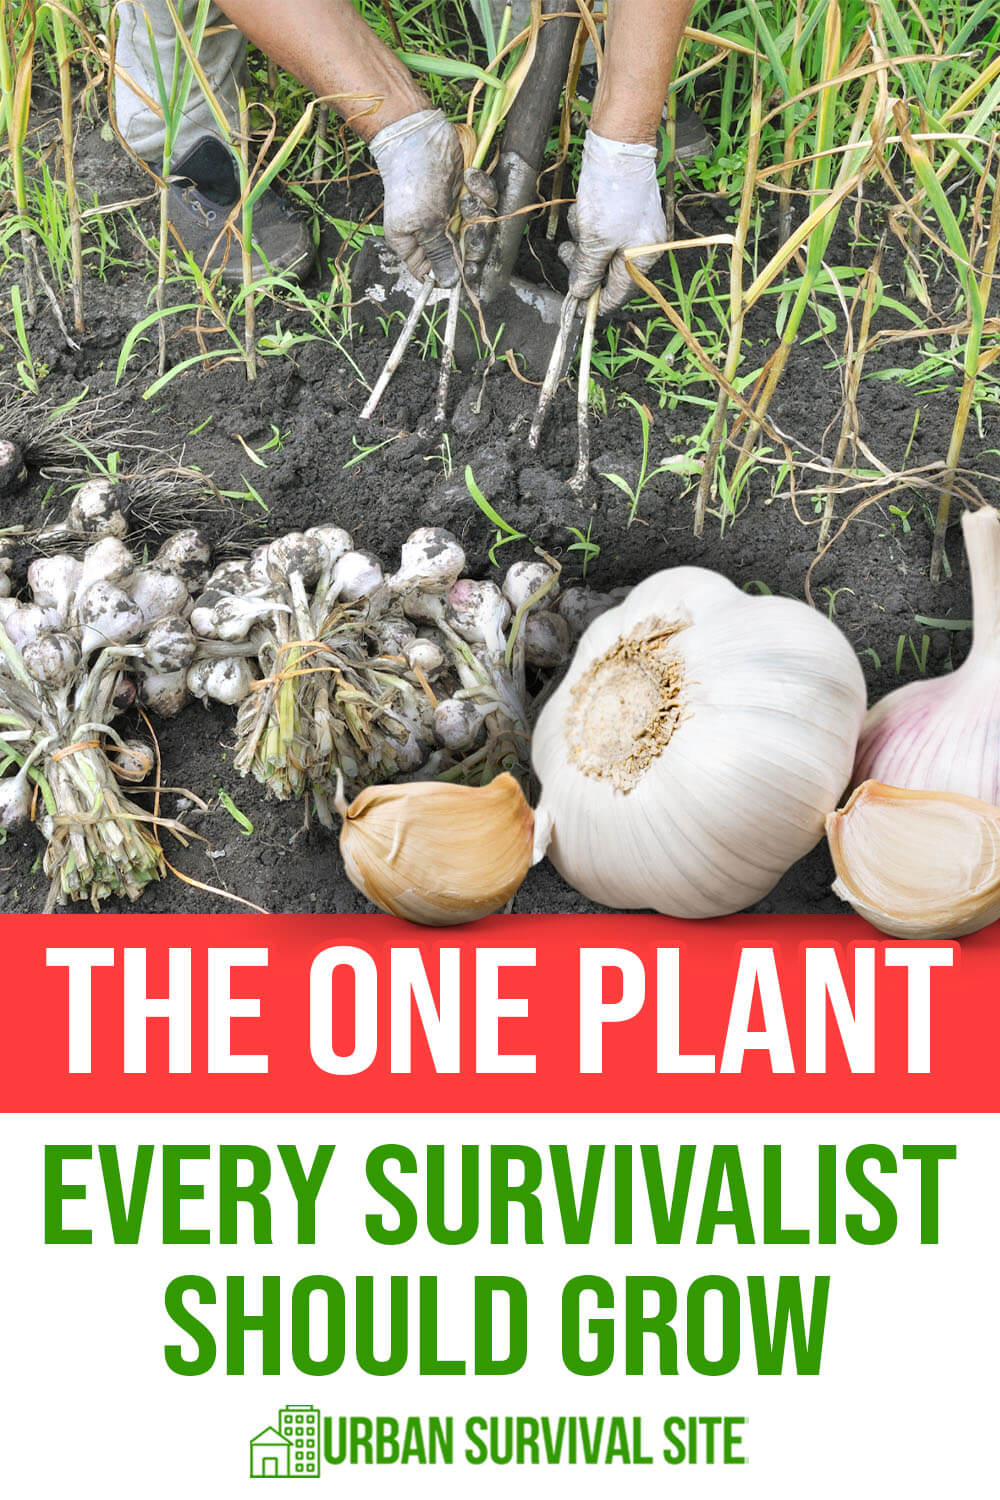 The One Plant Every Survivalist Should Grow